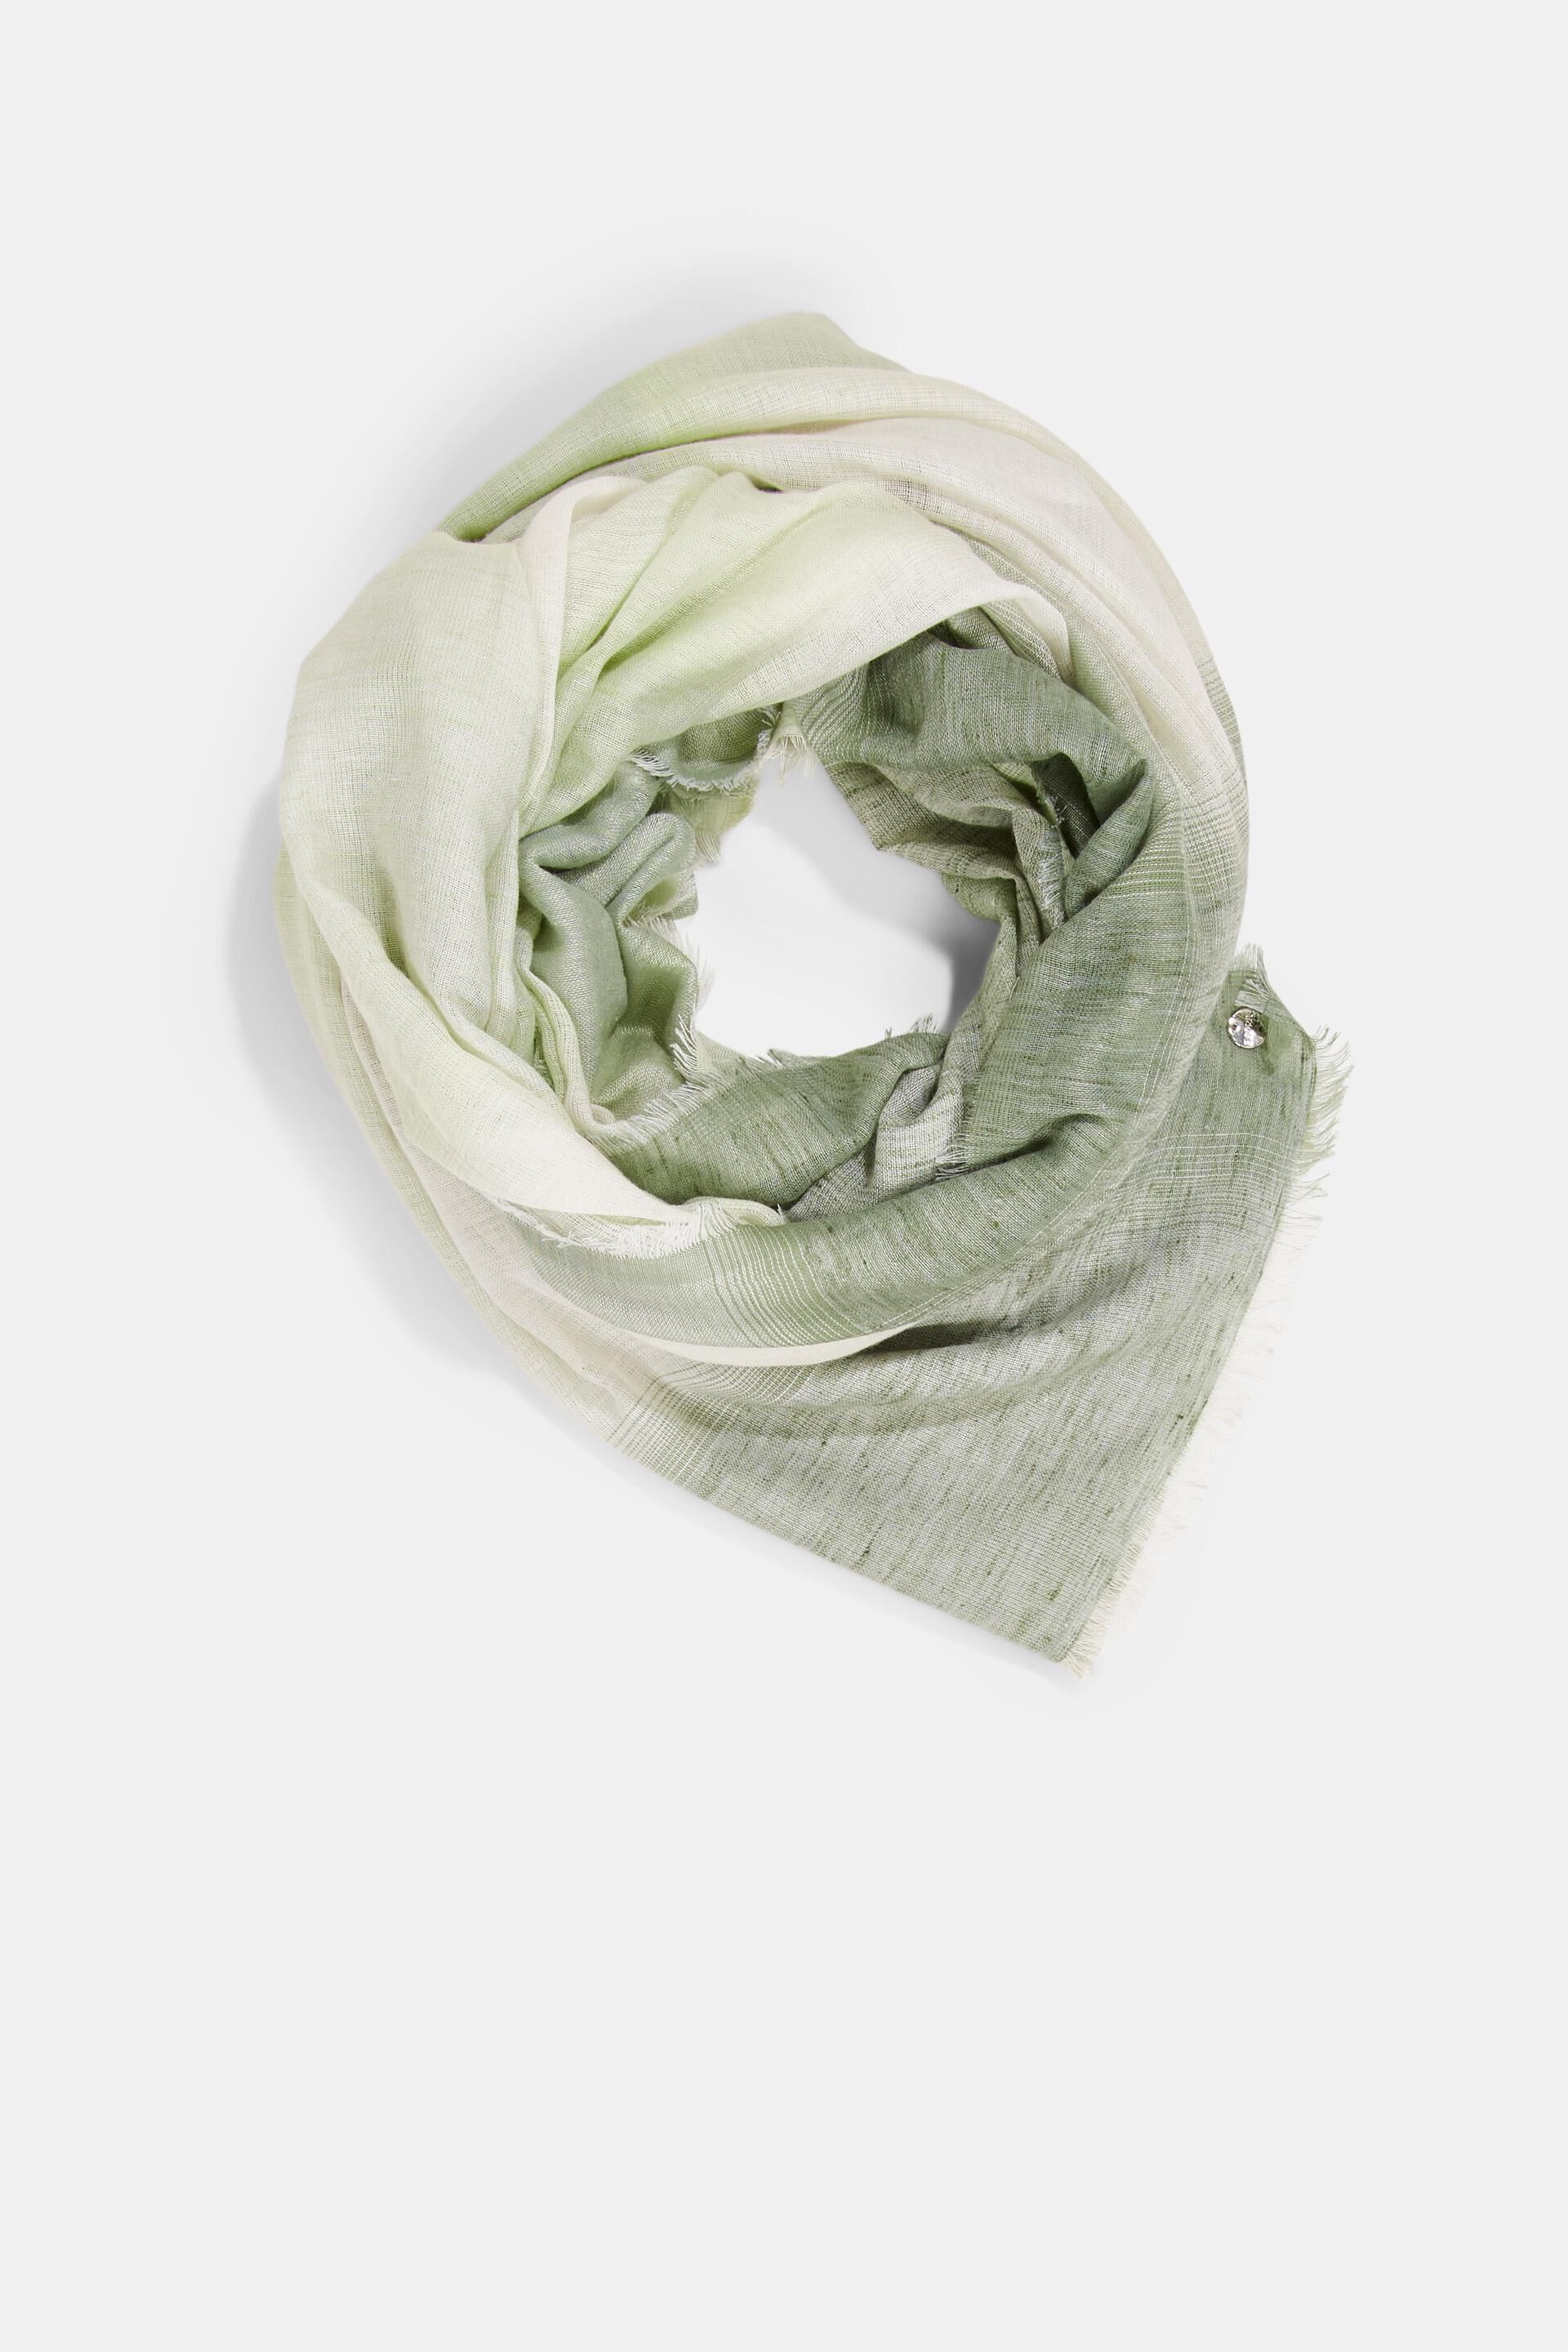 Esprit Tube Scarf green-cream cable stitch casual look Accessories Scarves Tube Scarves 